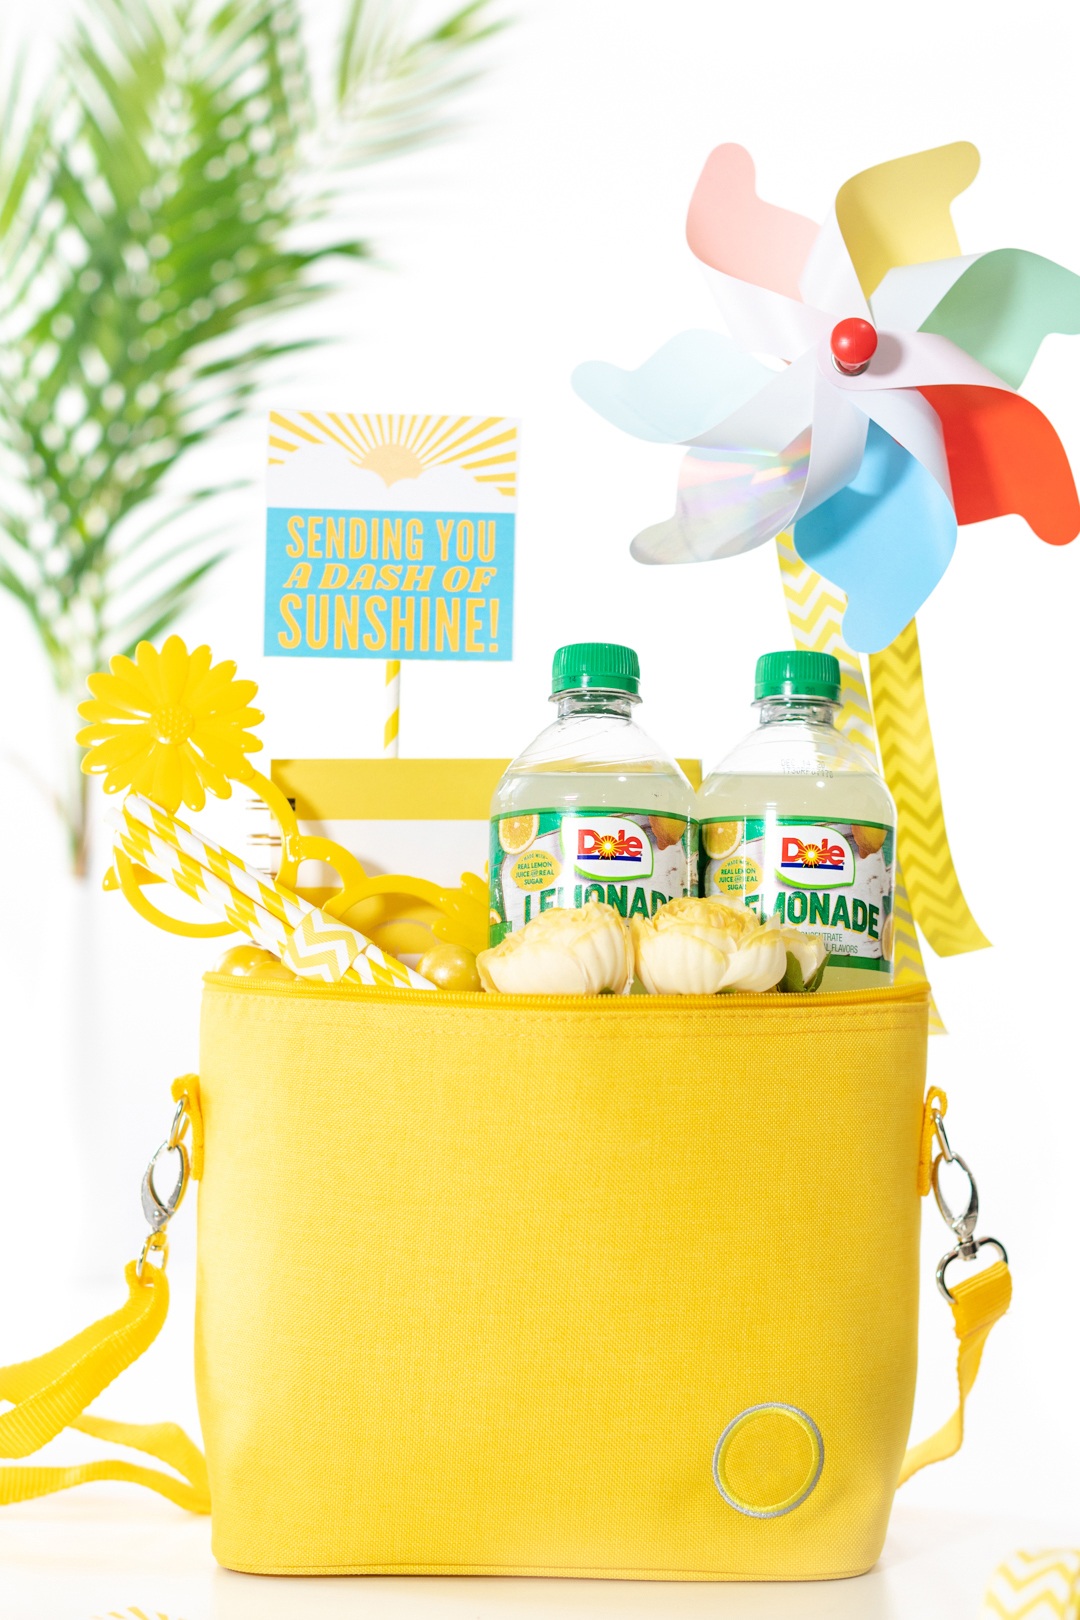 diy gift basket that is yellow themed. All gift trinkets are placed into a yellow mini cooler to deliver "sunshine" to a friend